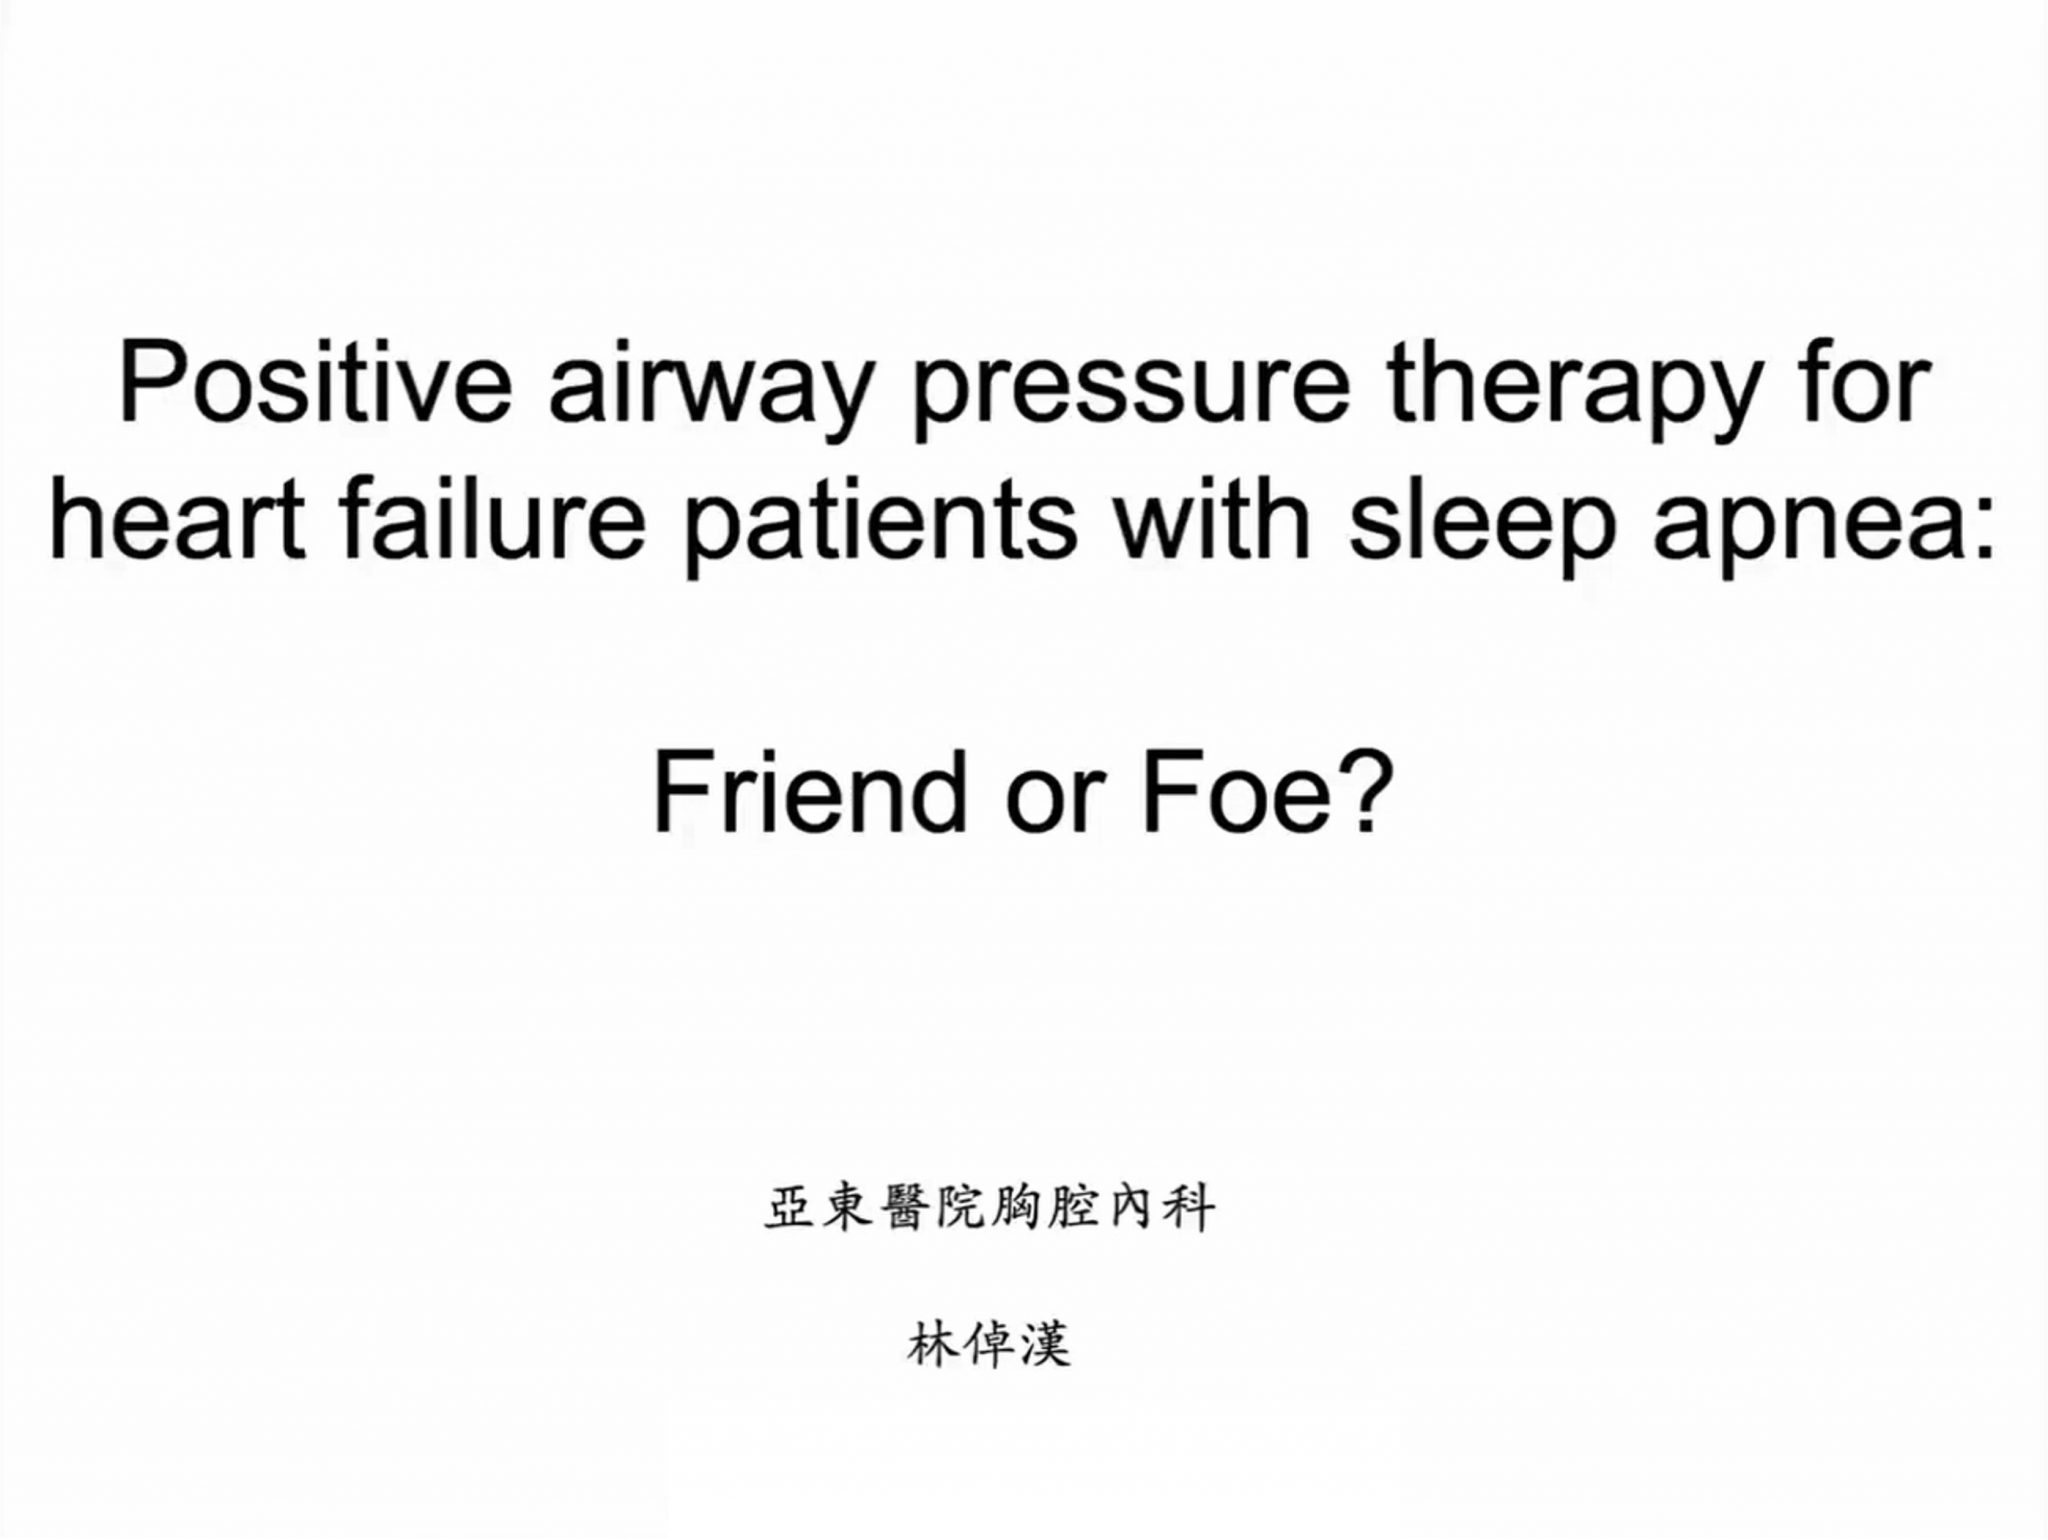 Positive airway pressure therapy for heart failure patients with sleep apnea: Friend or foe?